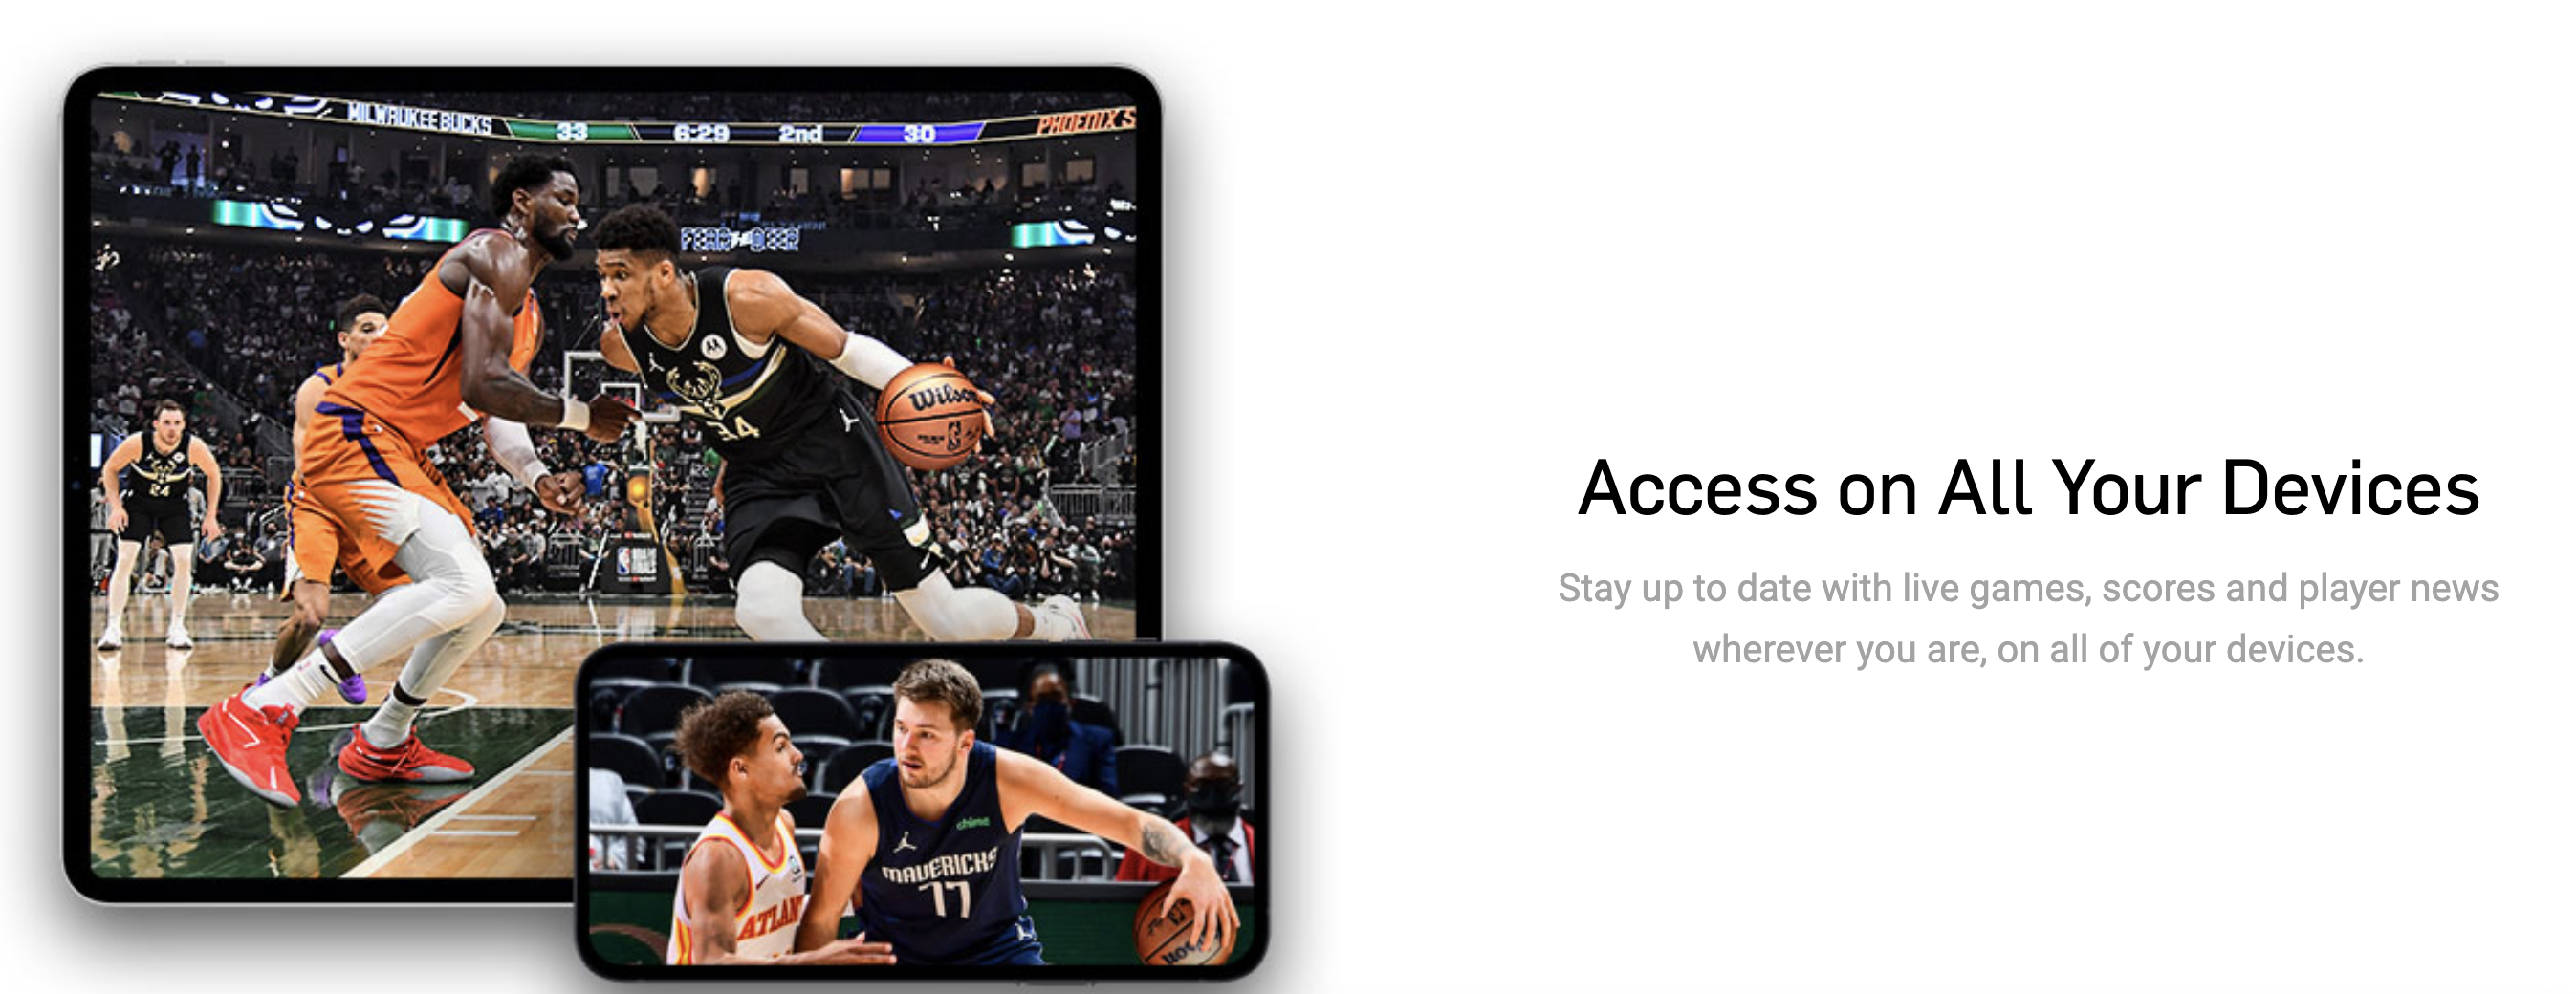 NBA League Pass returns ahead of new season at lowest price ever